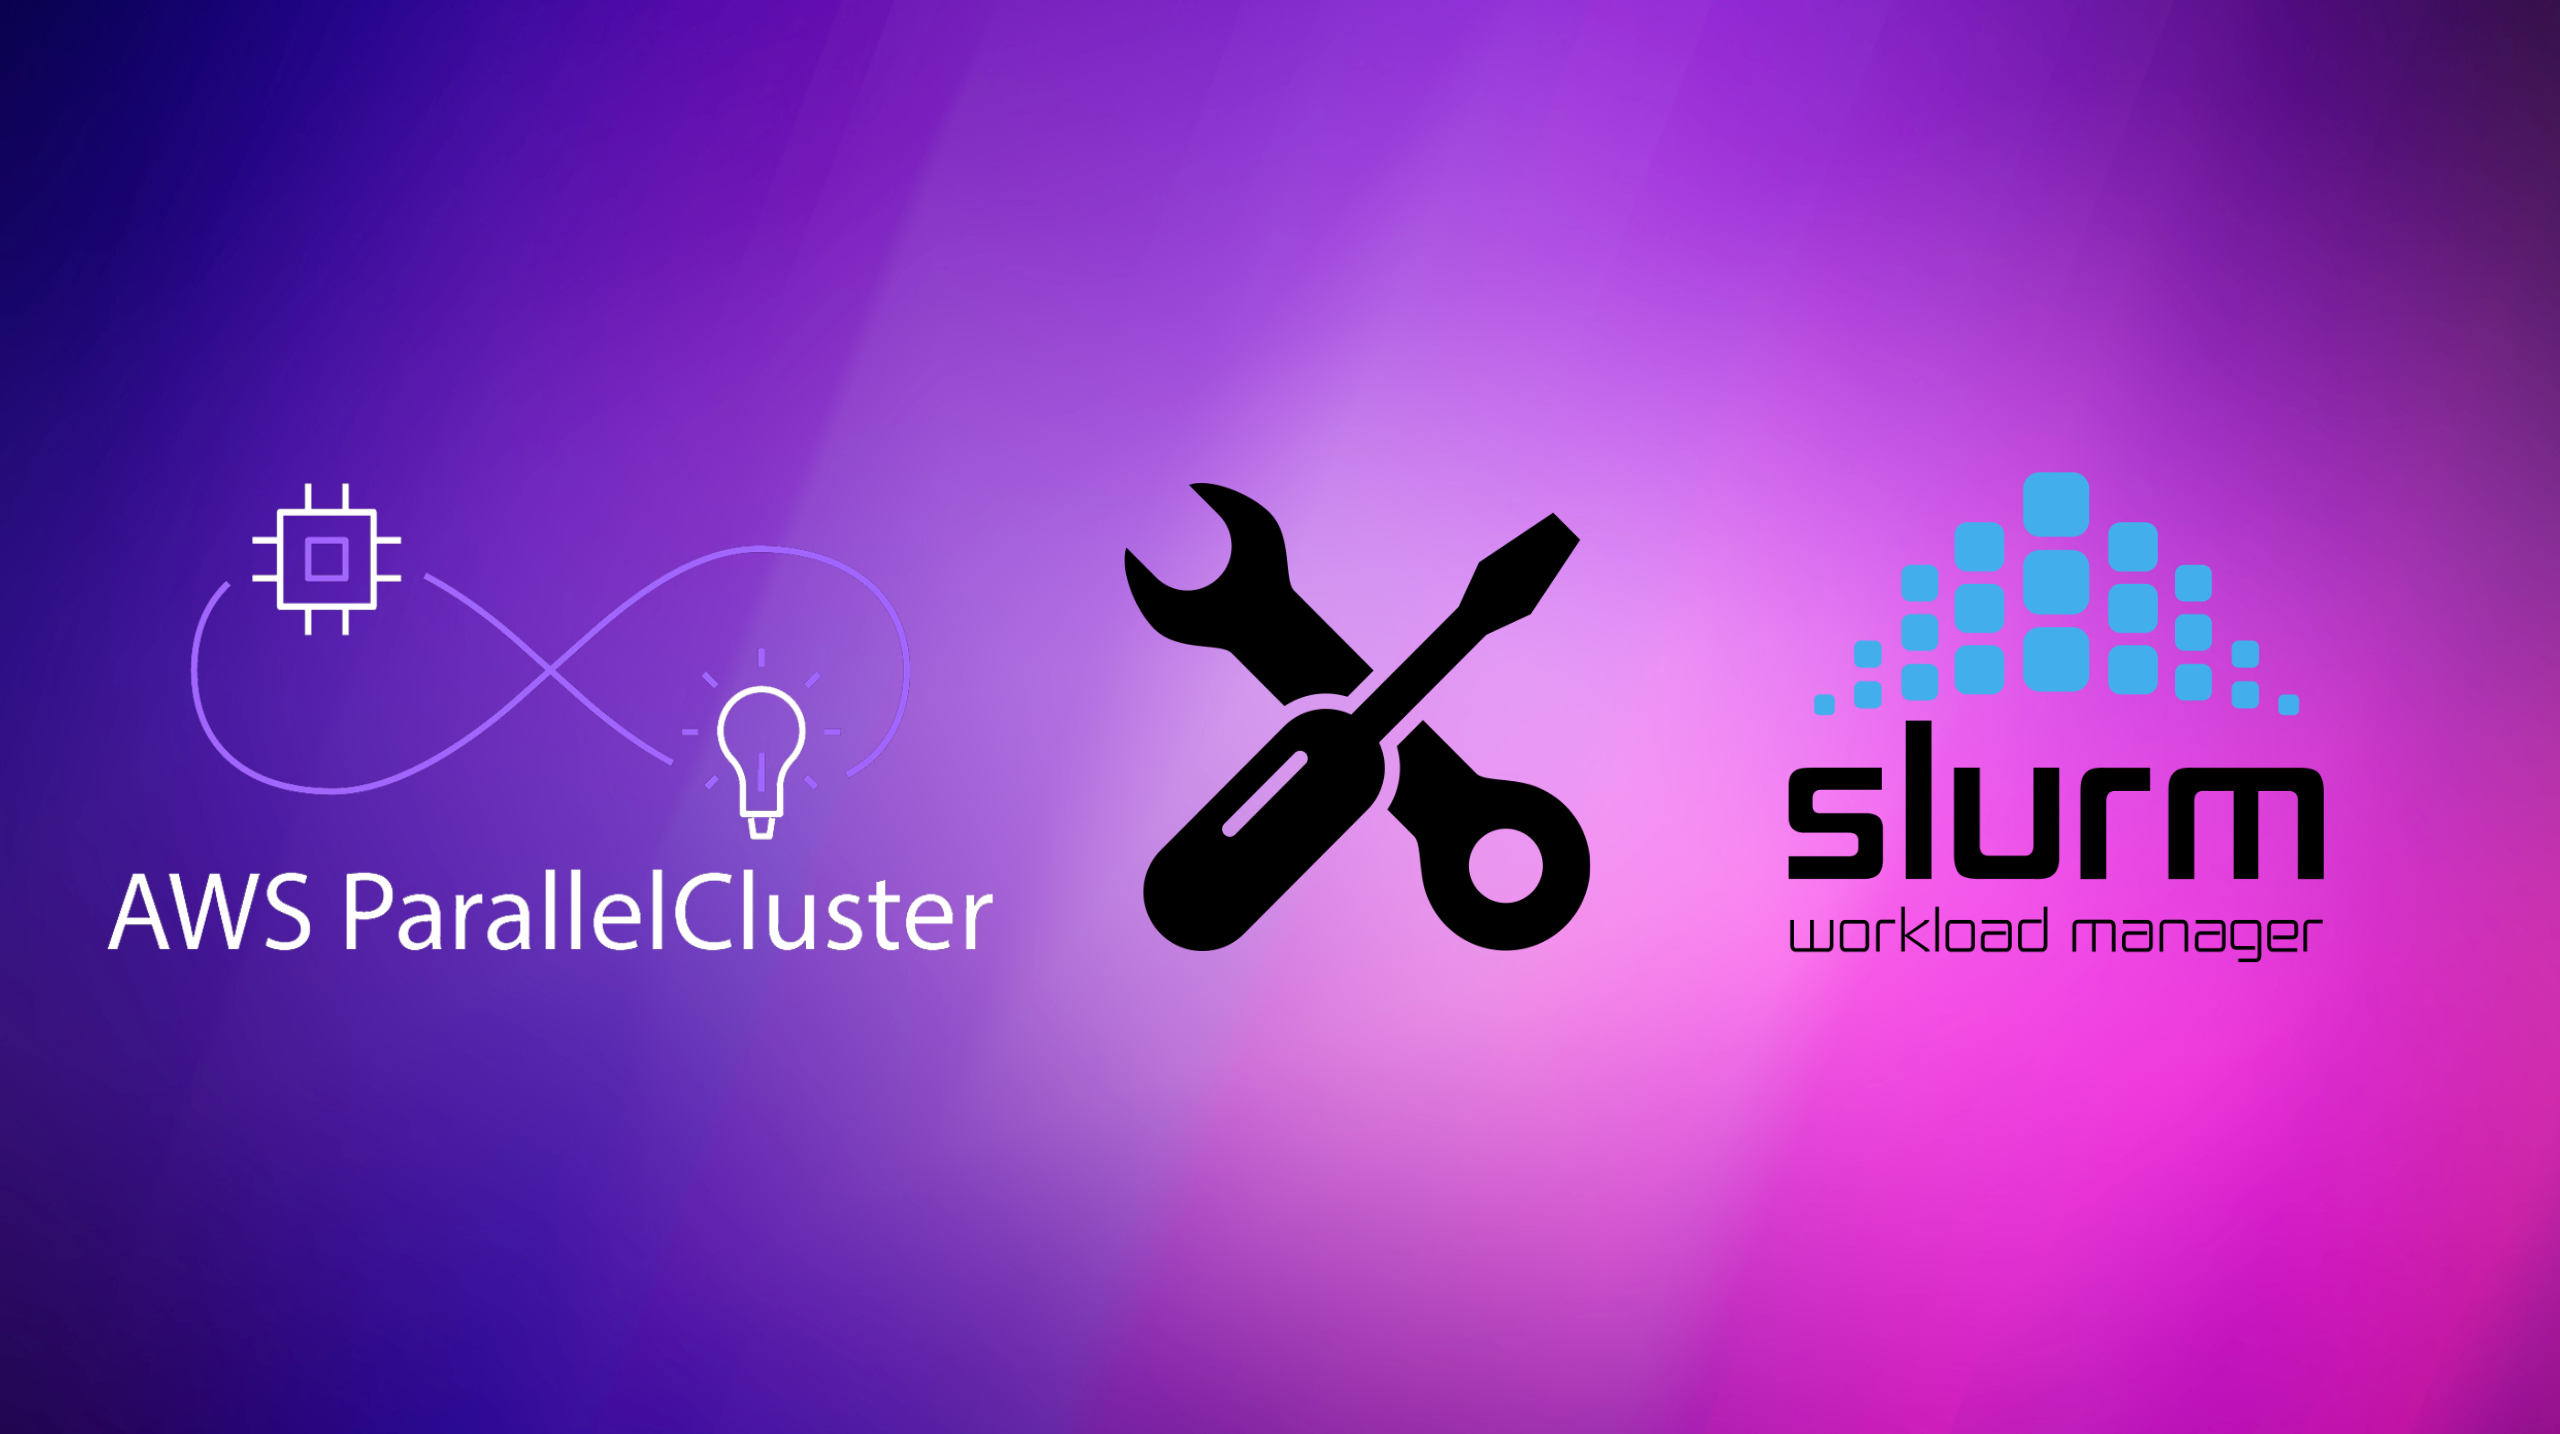 Troubleshooting Tips for Slurm and AWS ParallelCluster